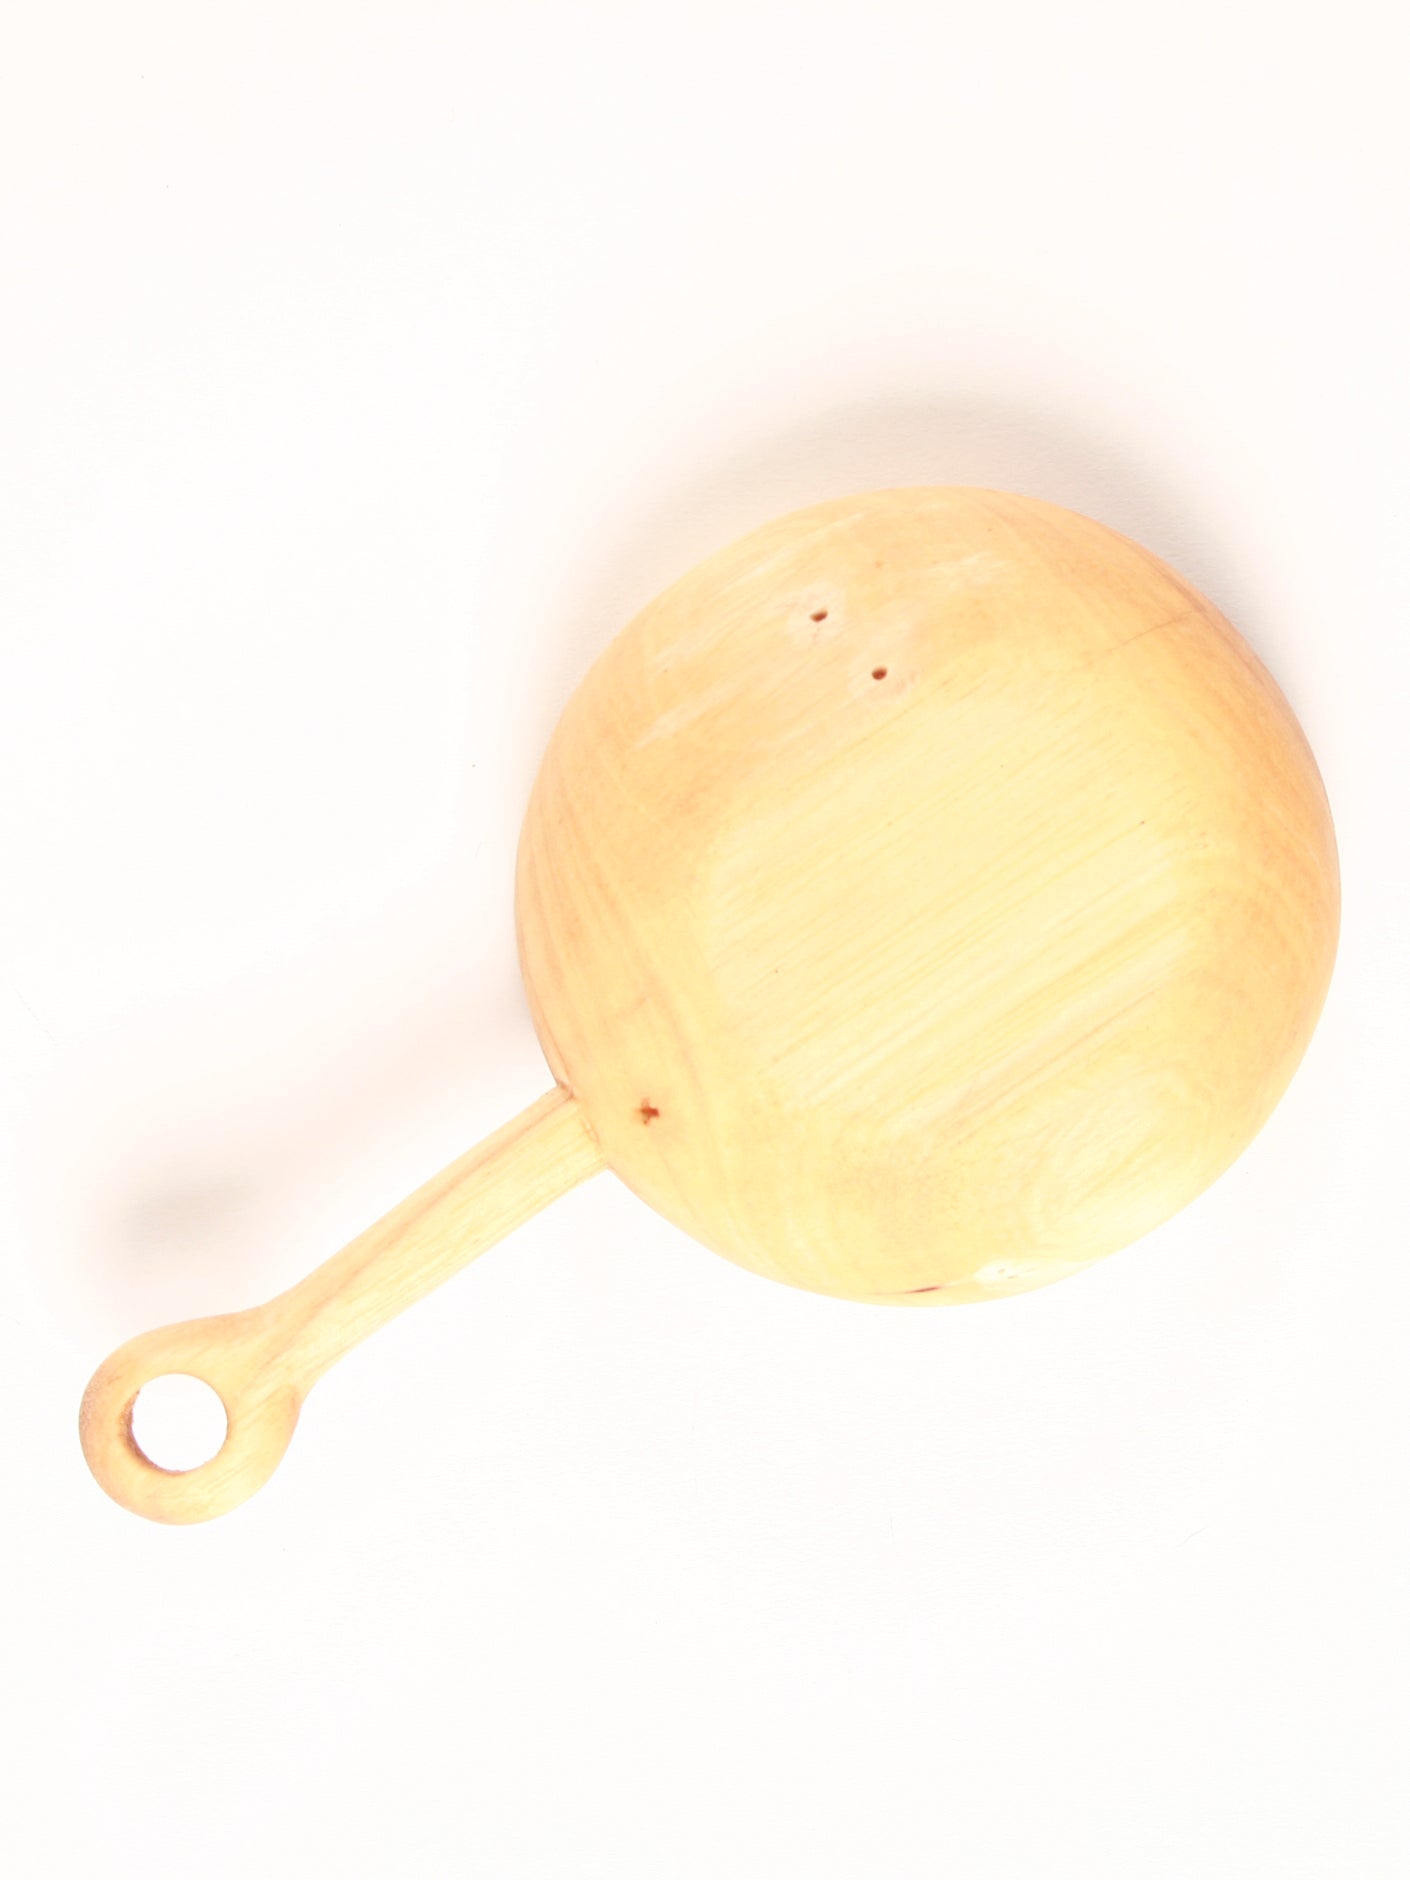 Driftwood spoon round, hand-carved